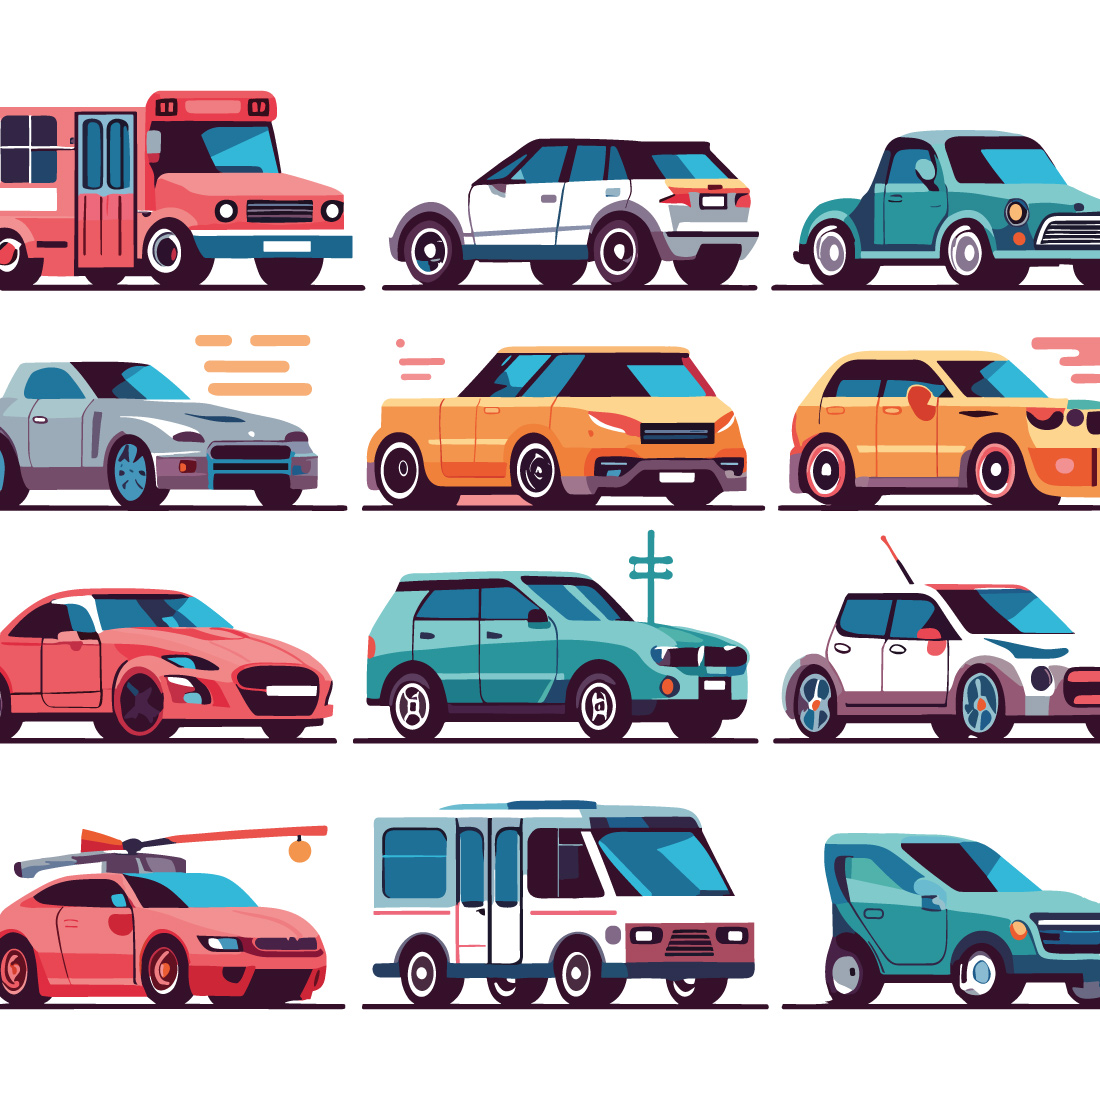 3d car icons isometric realistic, cars set of different models preview image.